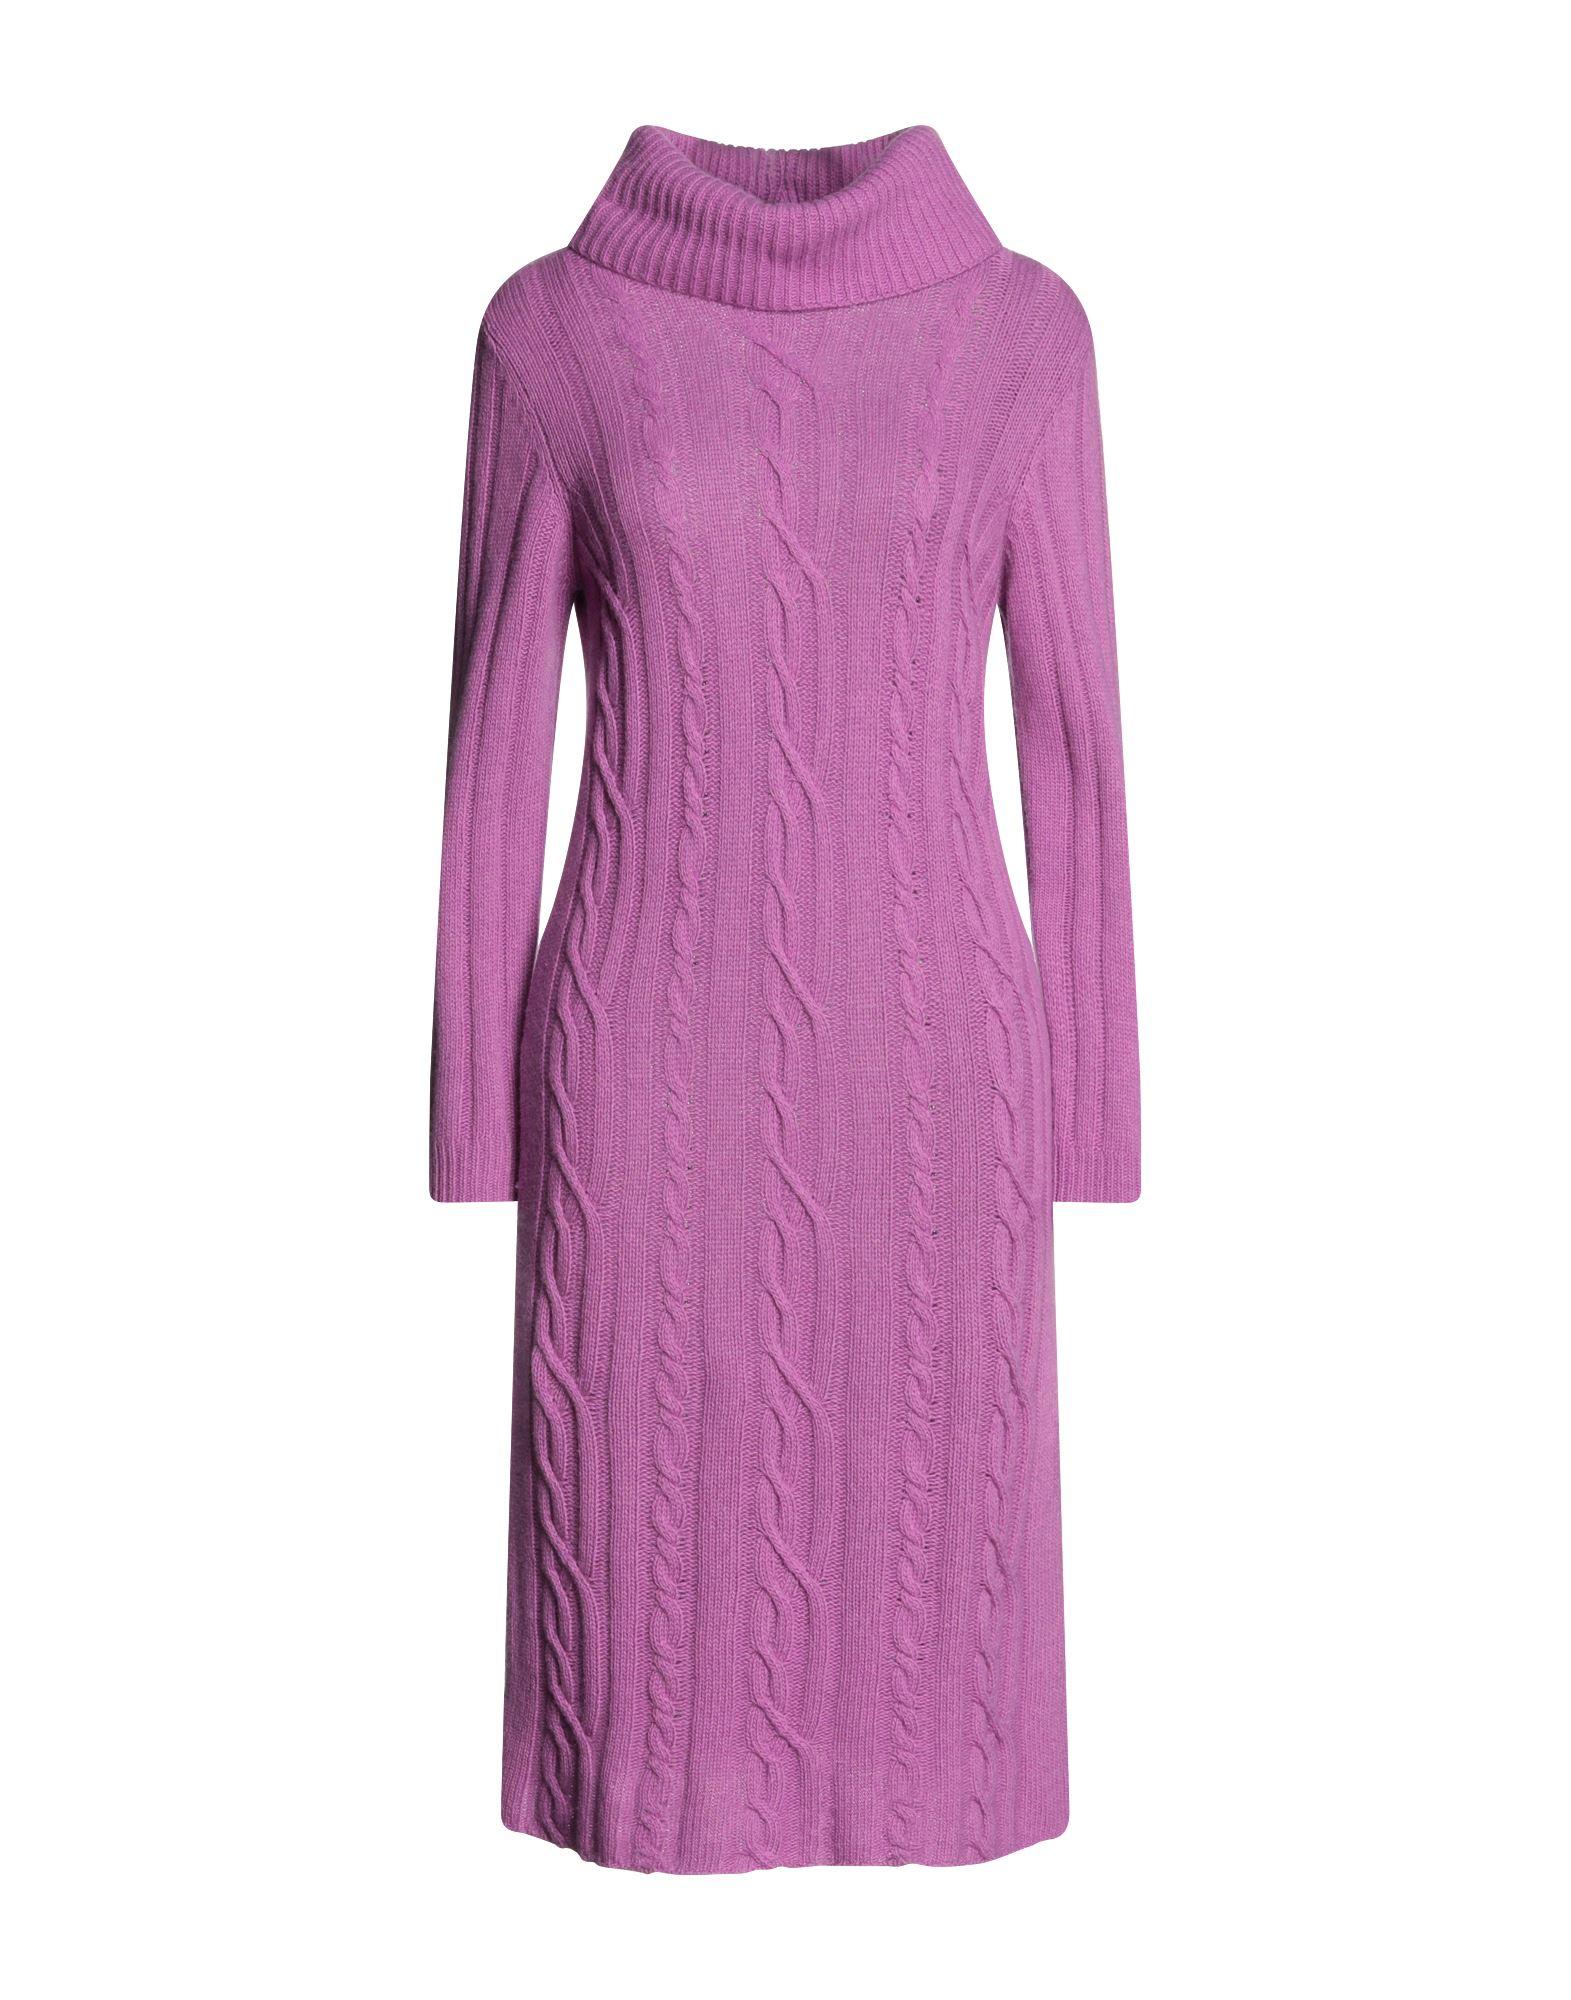 ANDREA ROSATI CASHMERE Turtleneck in Purple Womens Clothing Jumpers and knitwear Turtlenecks N.O.W 